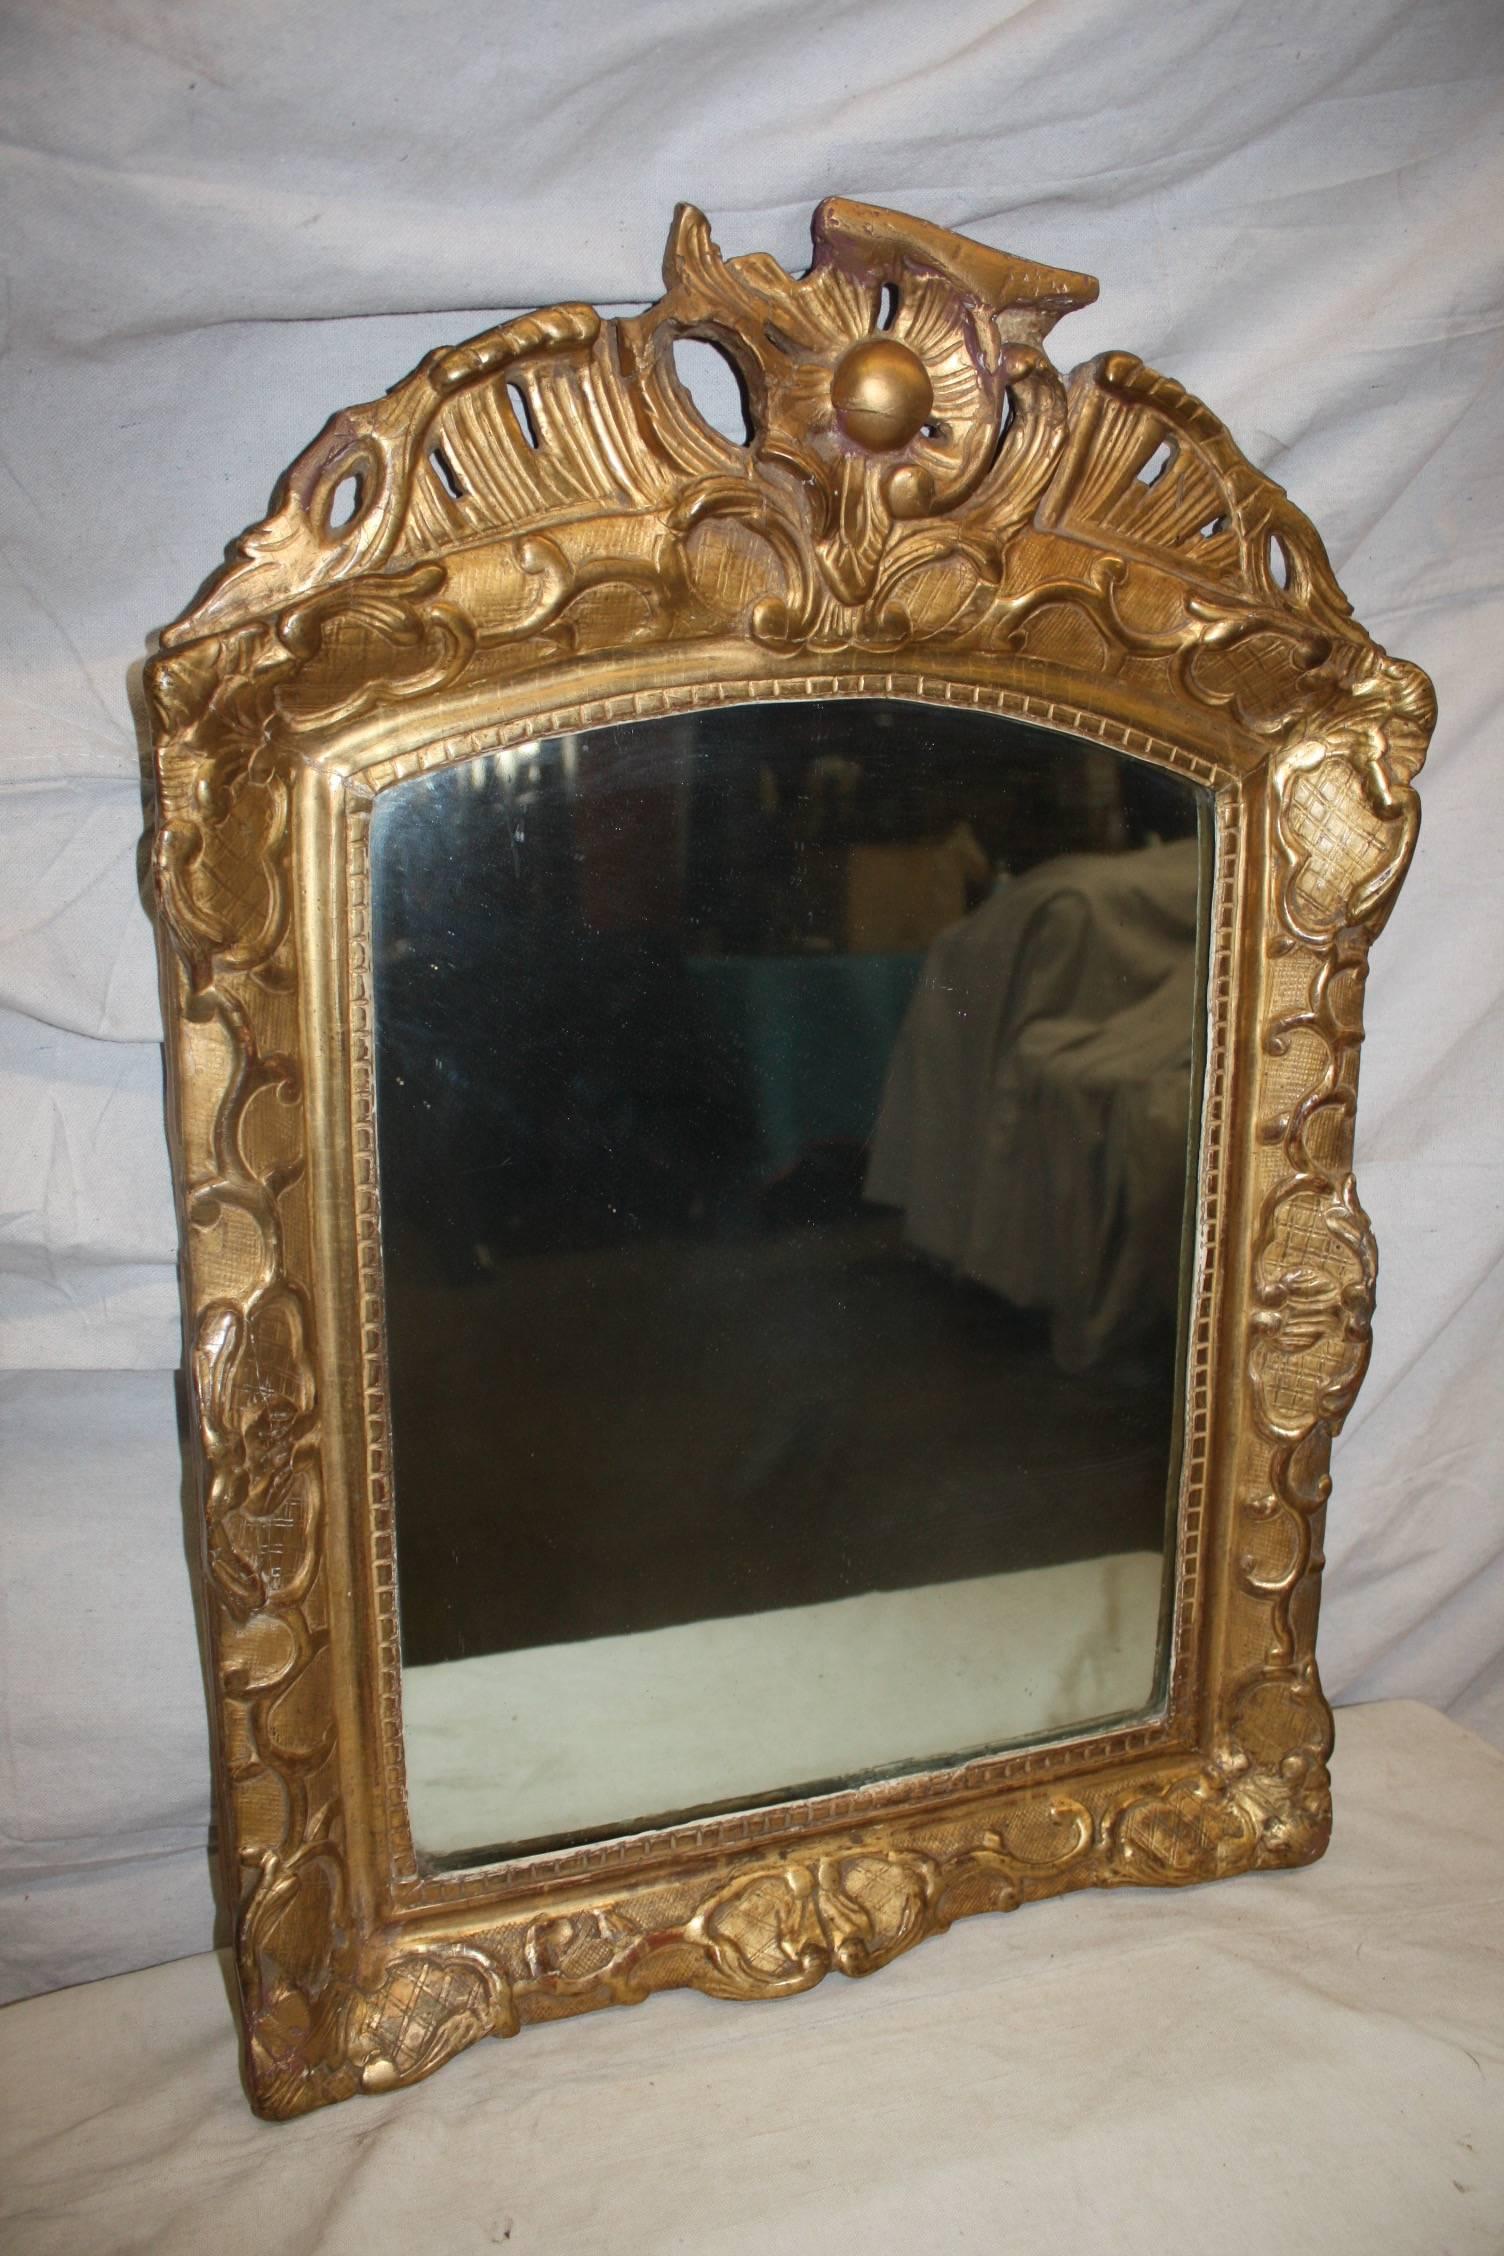 Charming French period Regence mirror.